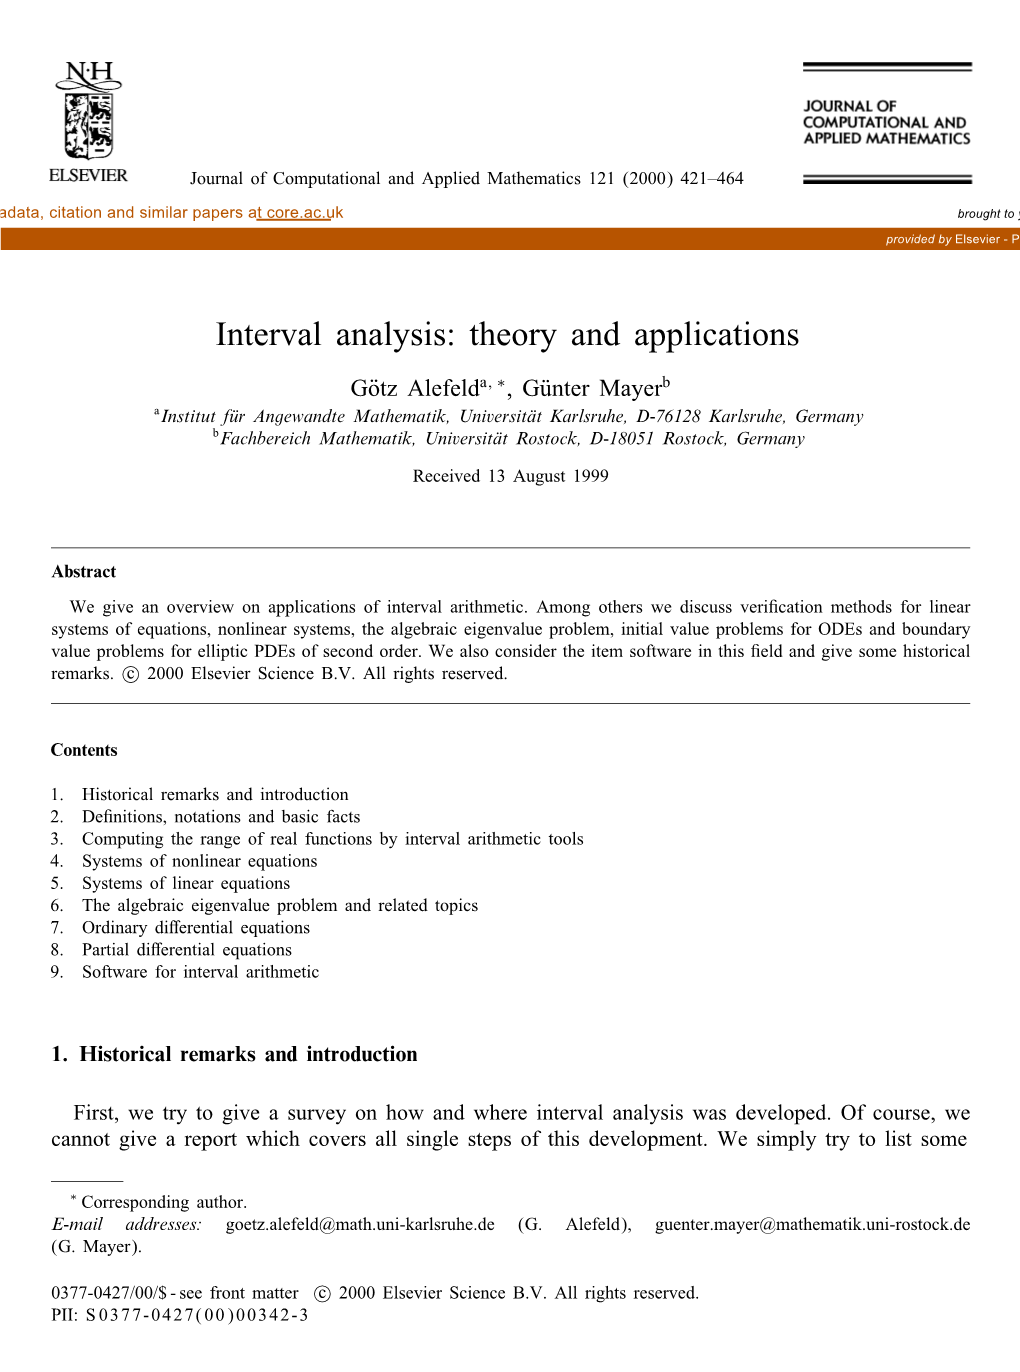 Interval Analysis: Theory and Applications